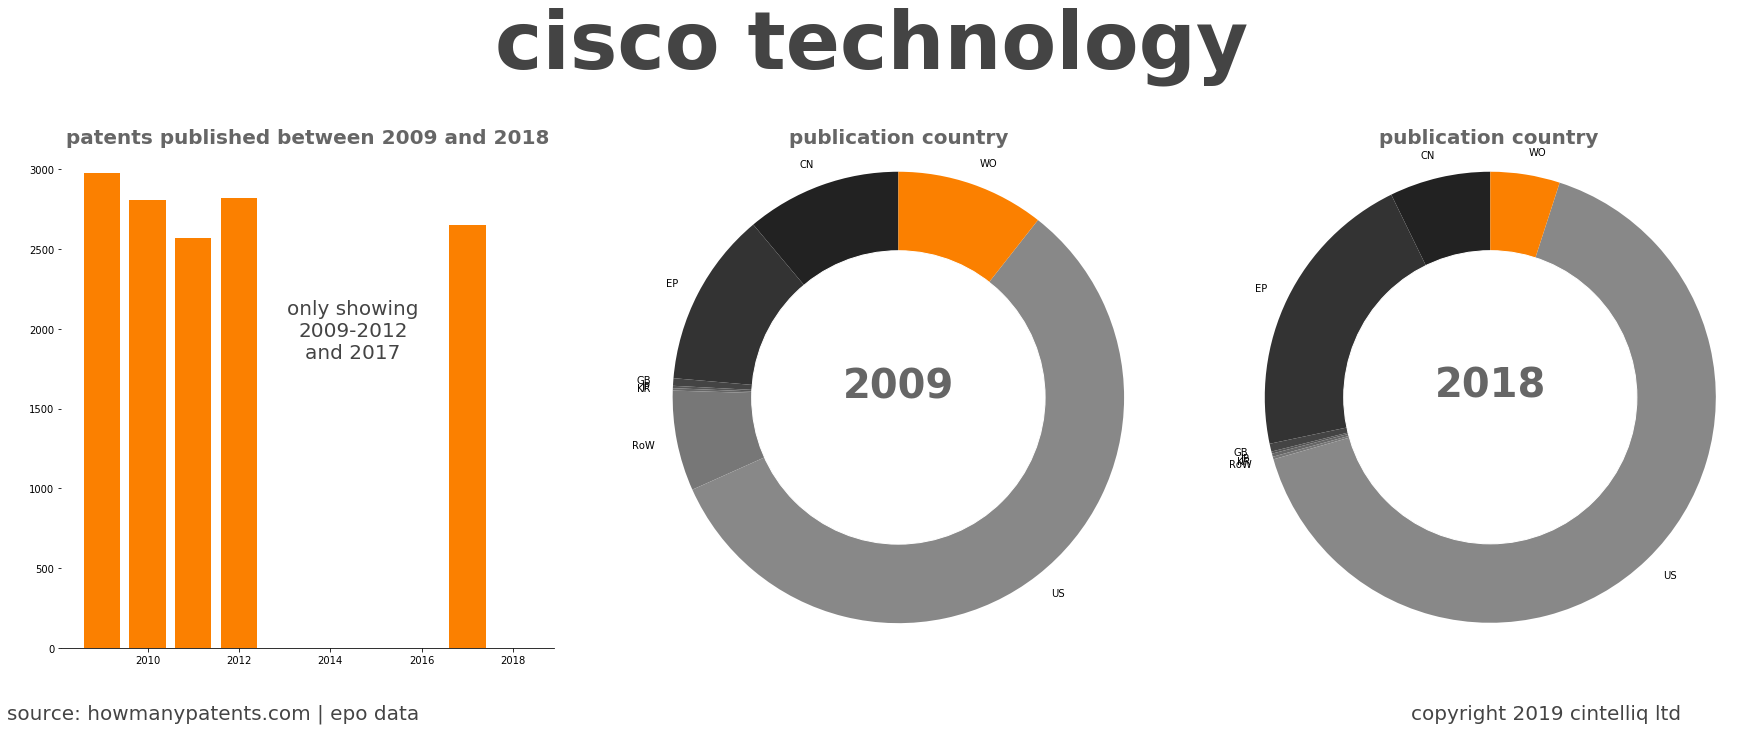 summary of patents for Cisco Technology